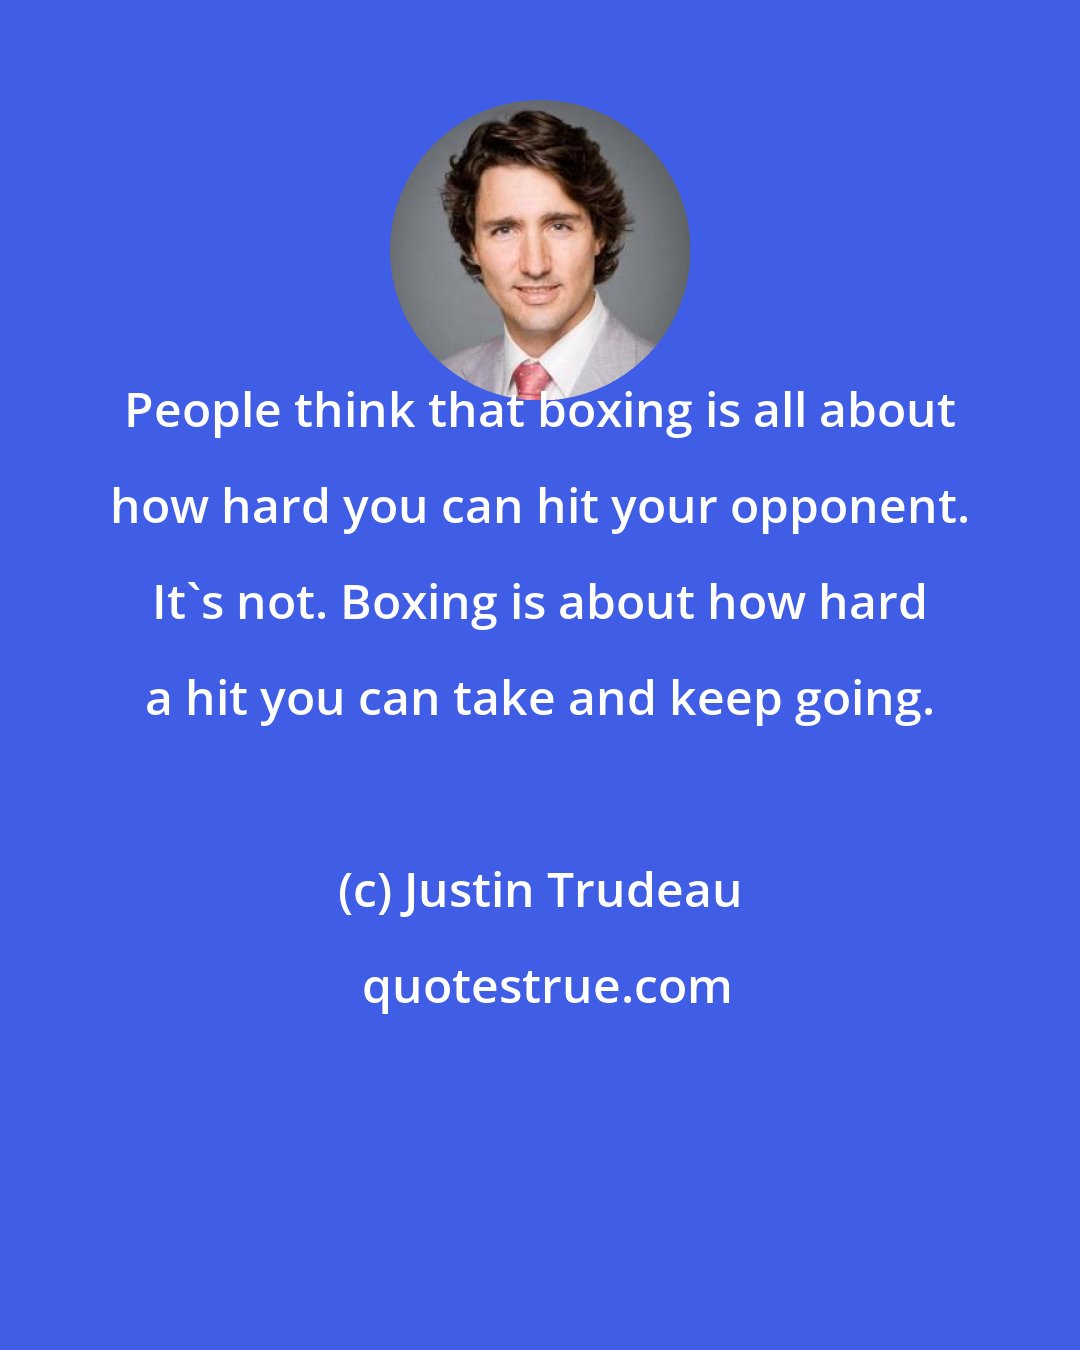 Justin Trudeau: People think that boxing is all about how hard you can hit your opponent. It's not. Boxing is about how hard a hit you can take and keep going.